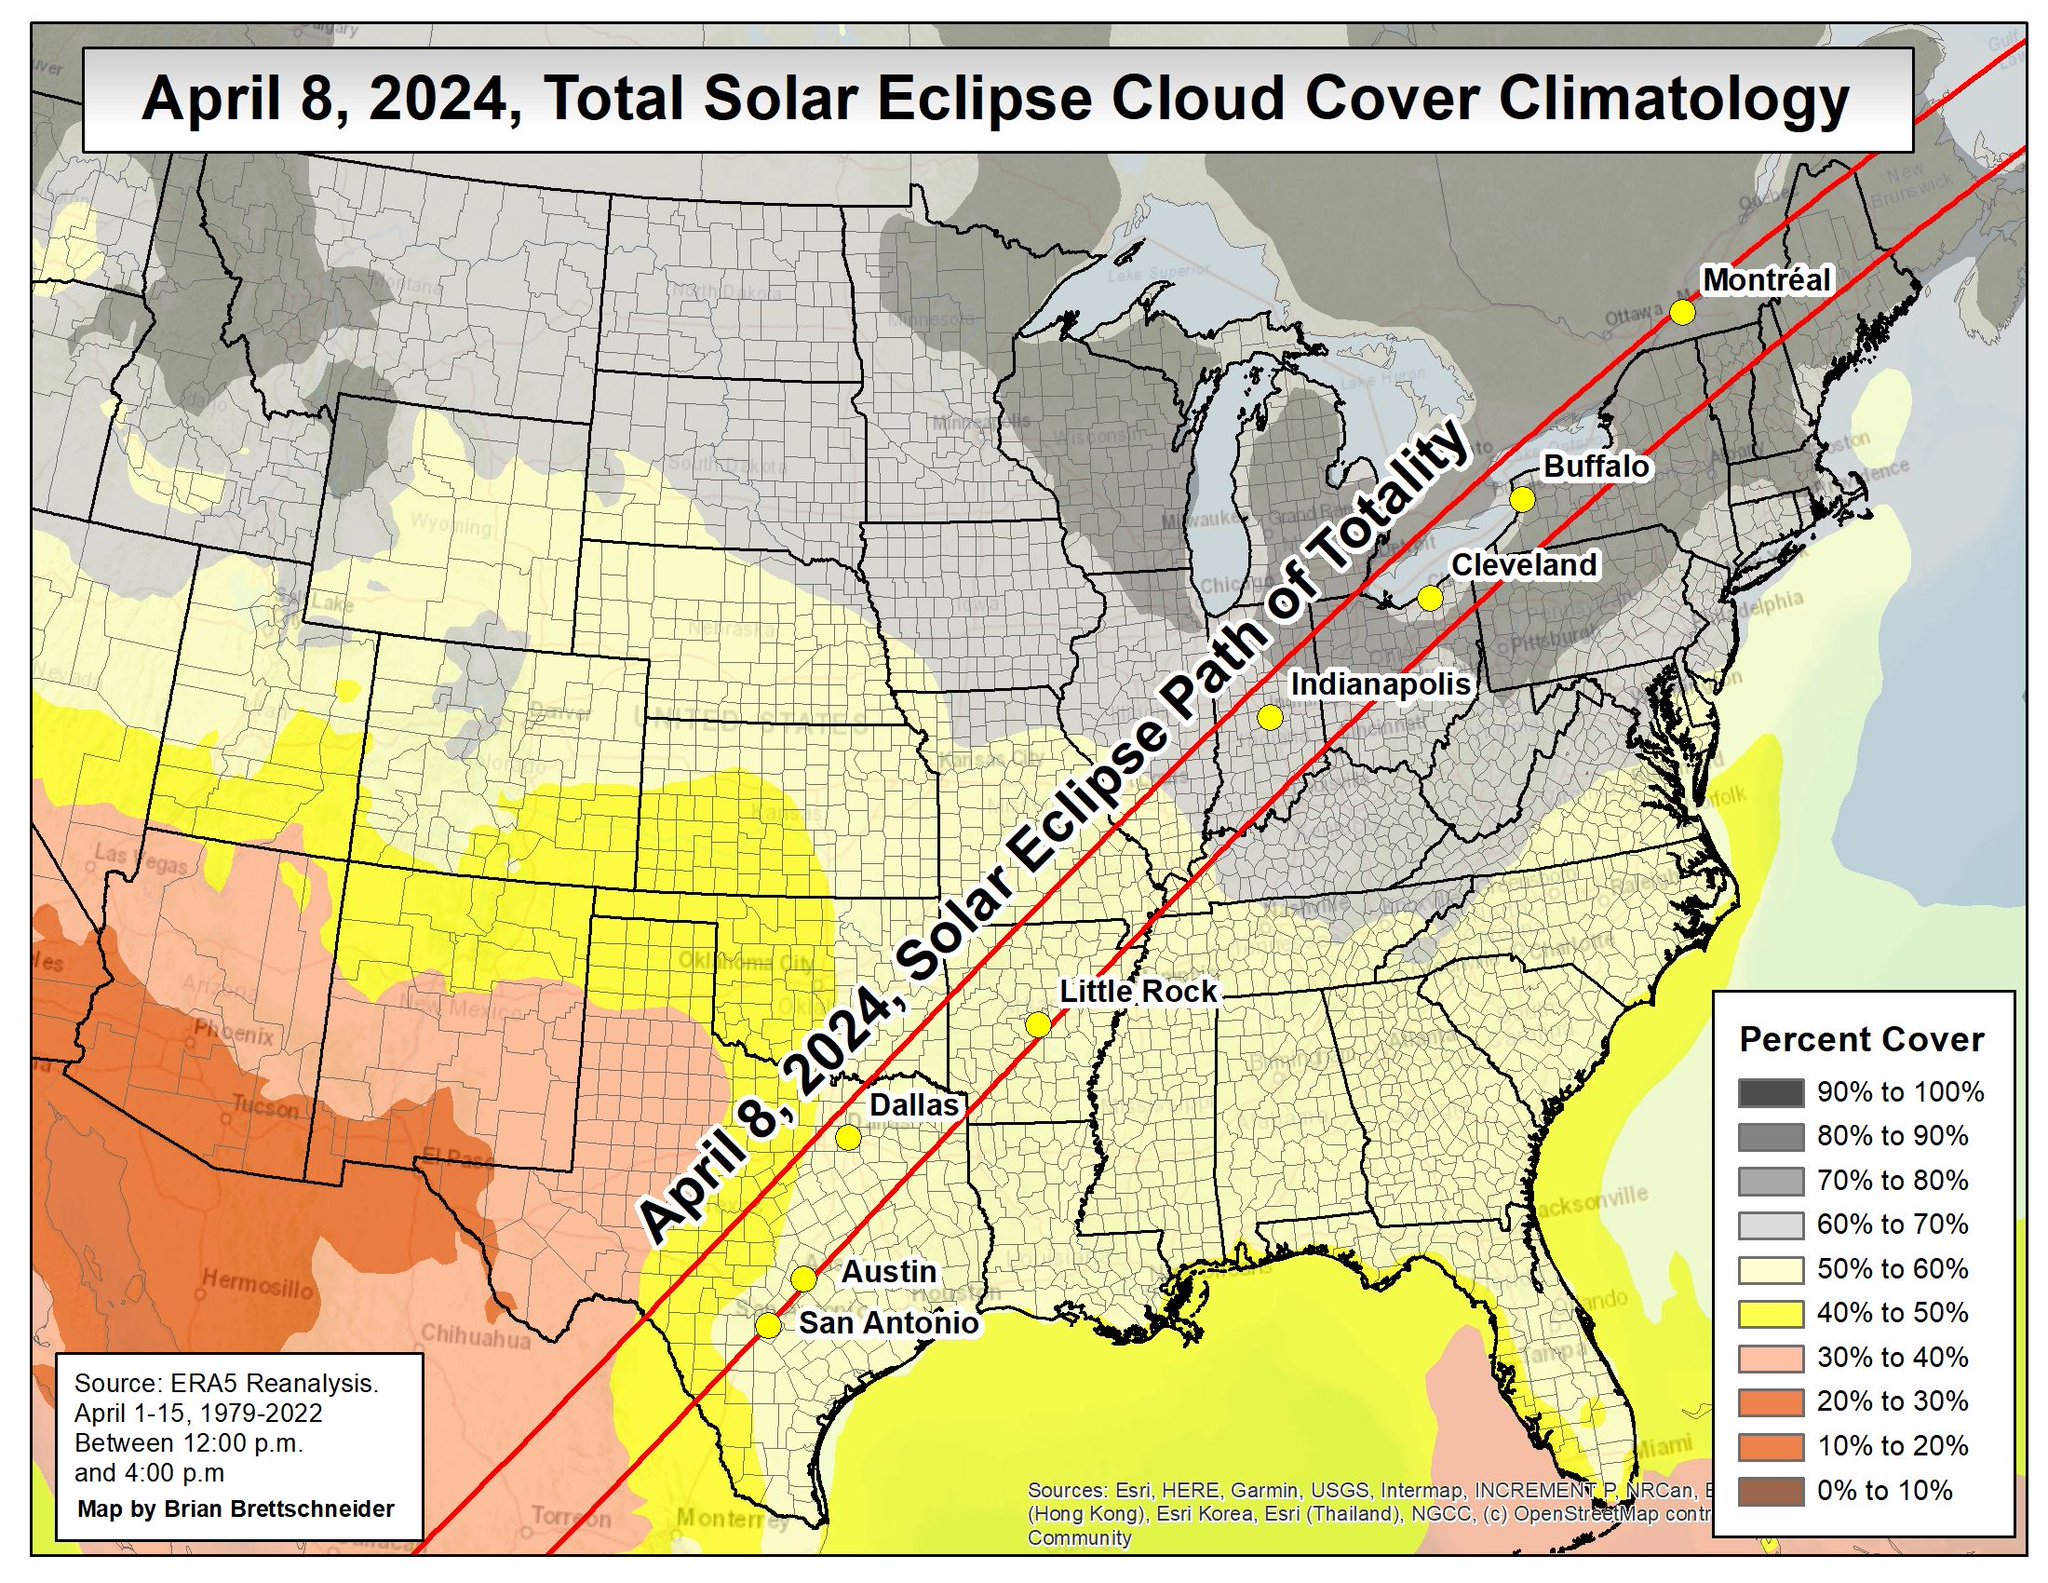 2024 Total Solar Eclipse Central Indiana Climatology and Information